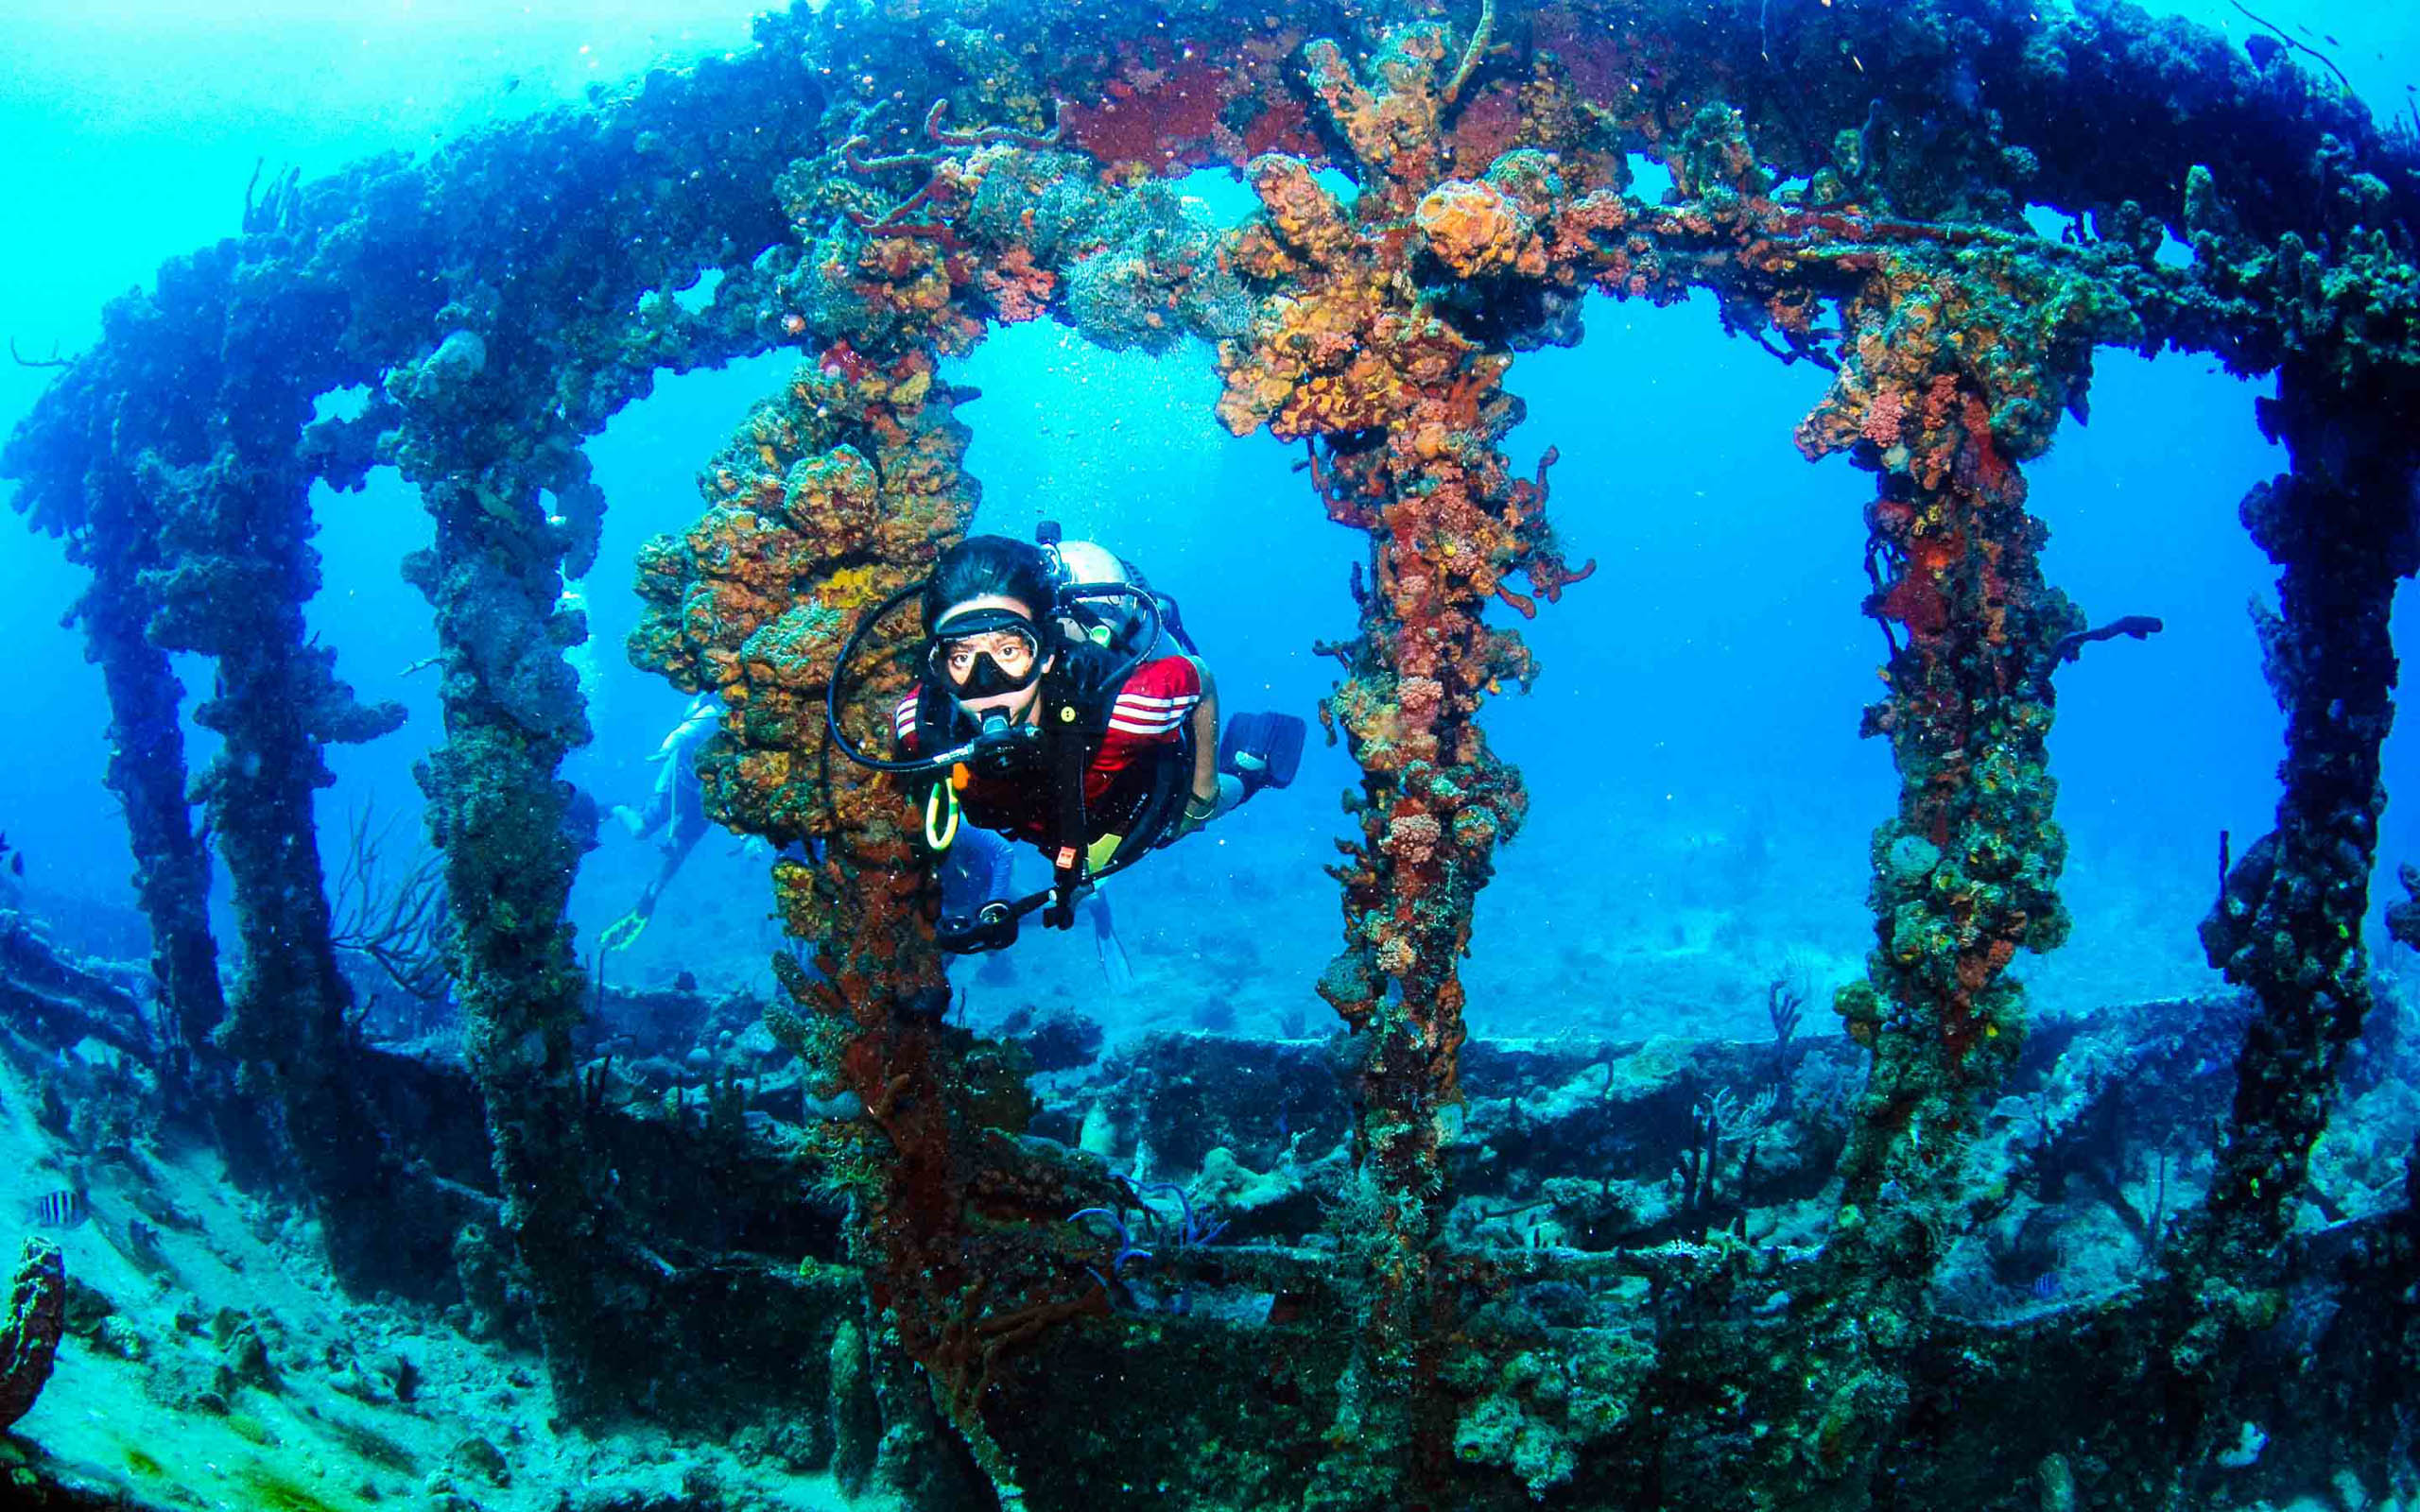 A scuba diver is diving in the wreck of a ship.